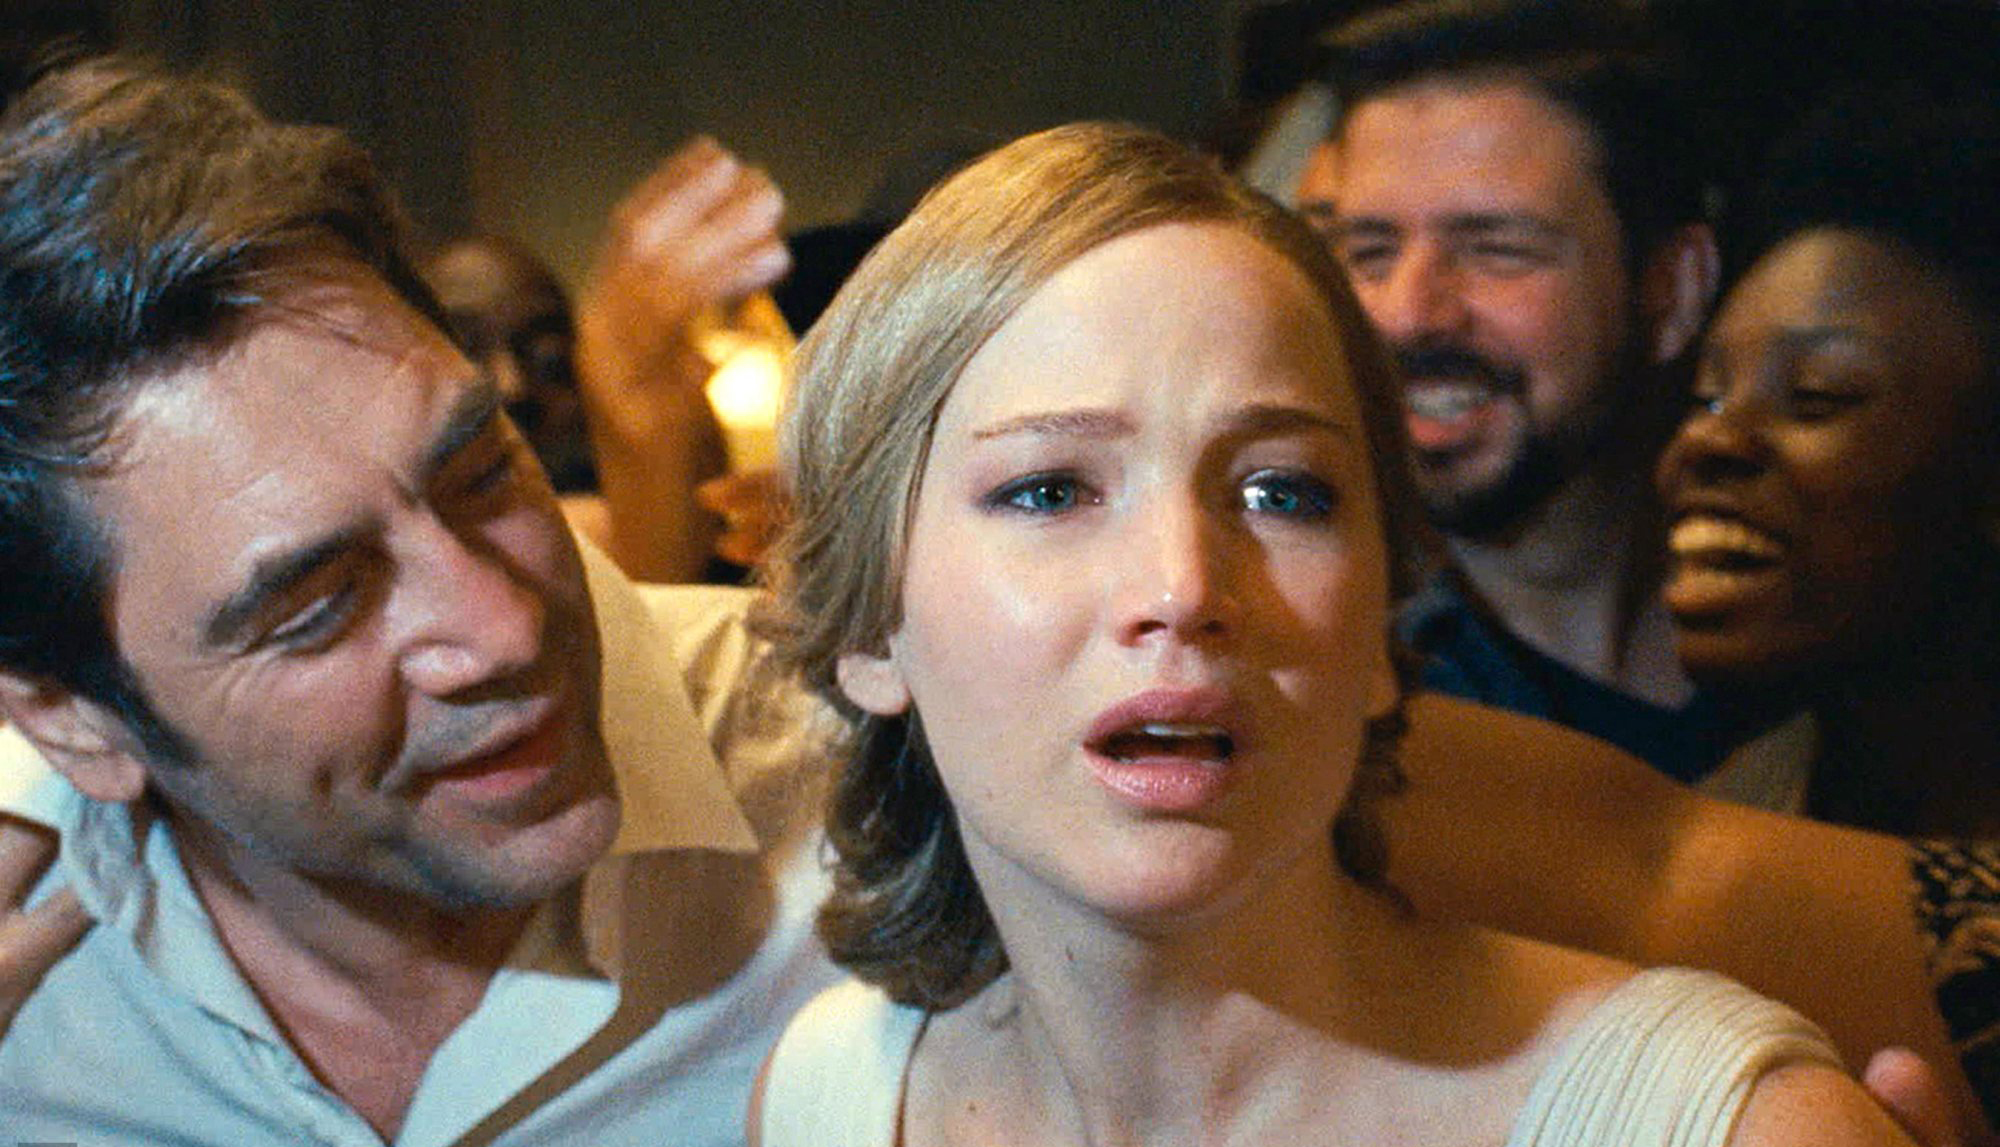 mother! Left to right: Javier Bardem as Eli and Jennifer Lawrence as Grace